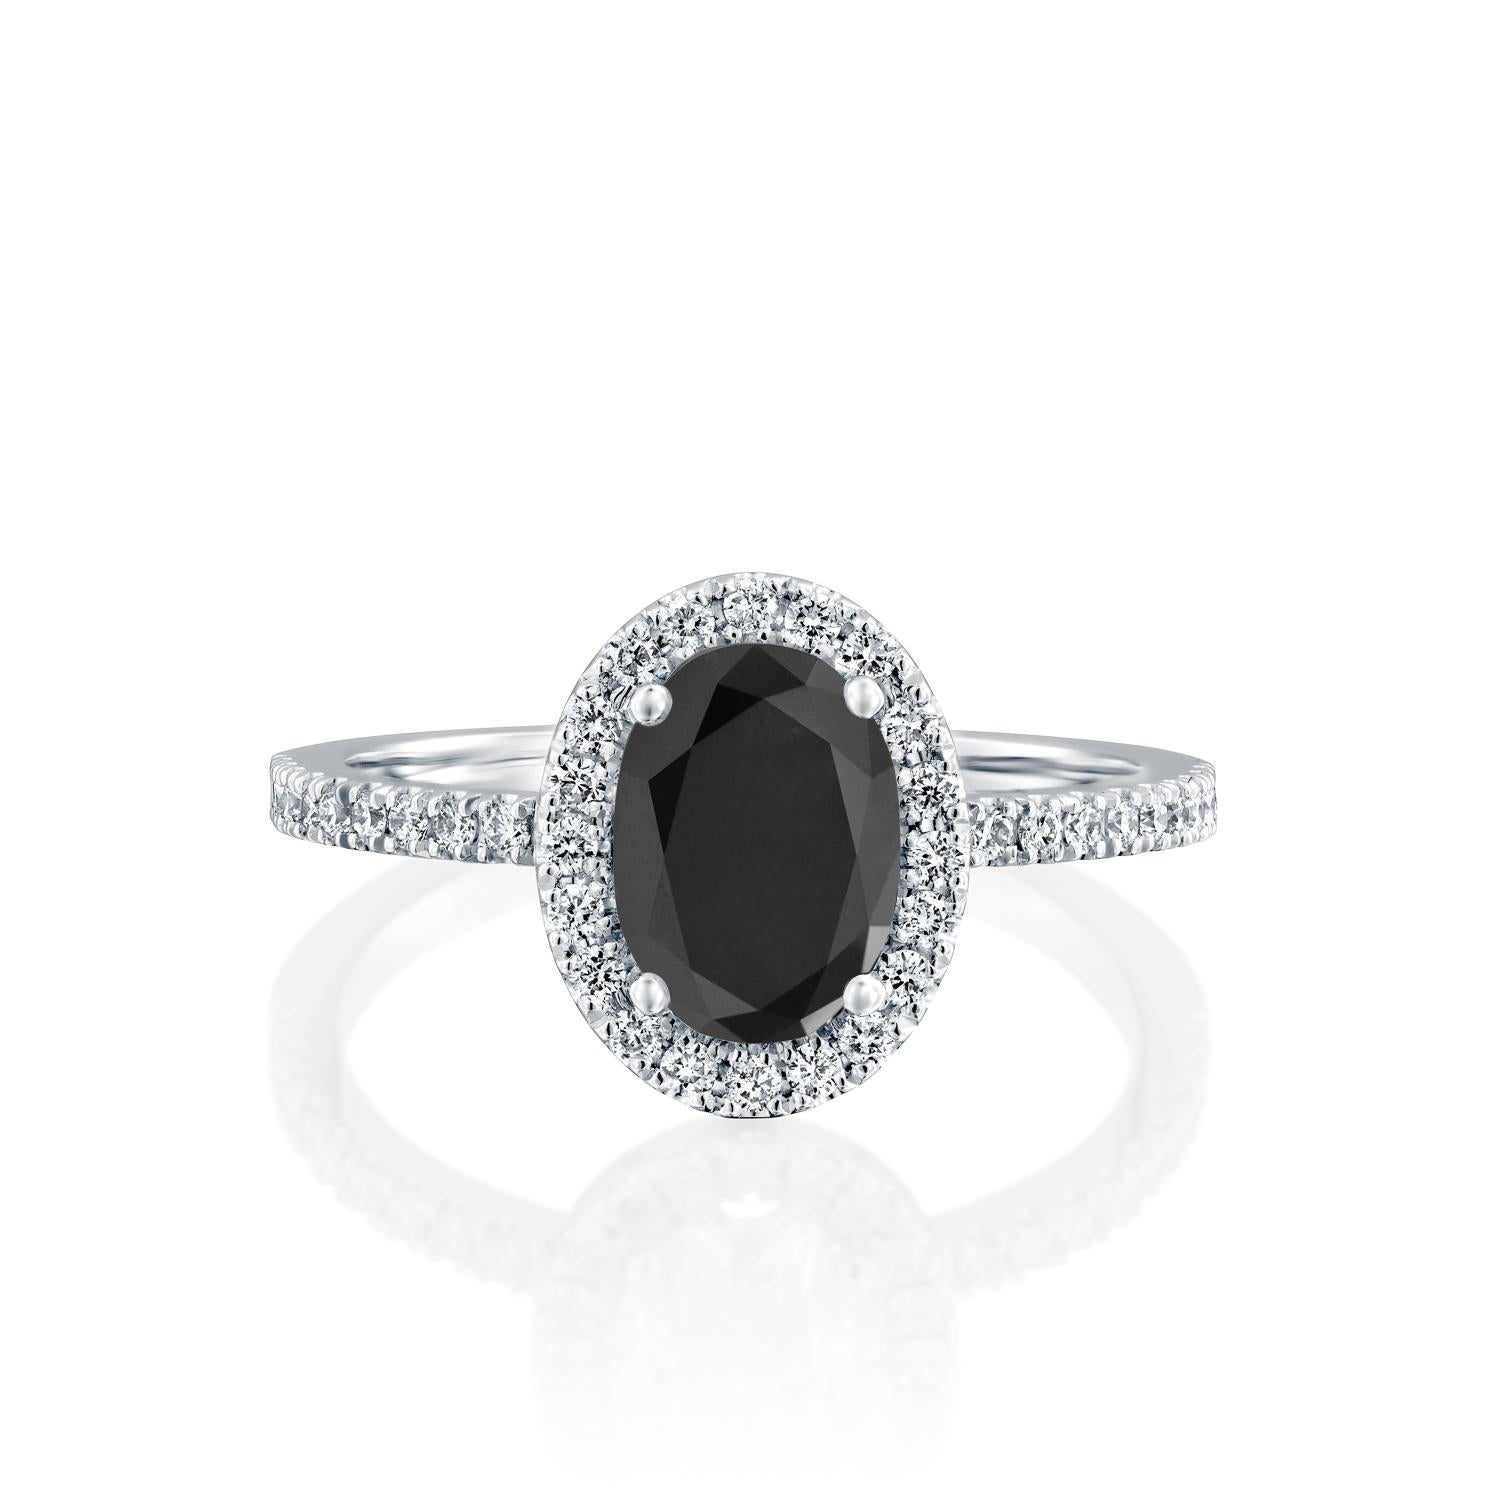 Beautiful solitaire with accents vintage style diamond engagement ring. Center stone is natural, oval shaped, AAA quality Black Diamond of 2 carat and it is surrounded by smaller natural diamonds approx. 0.5 total carat weight. The total carat